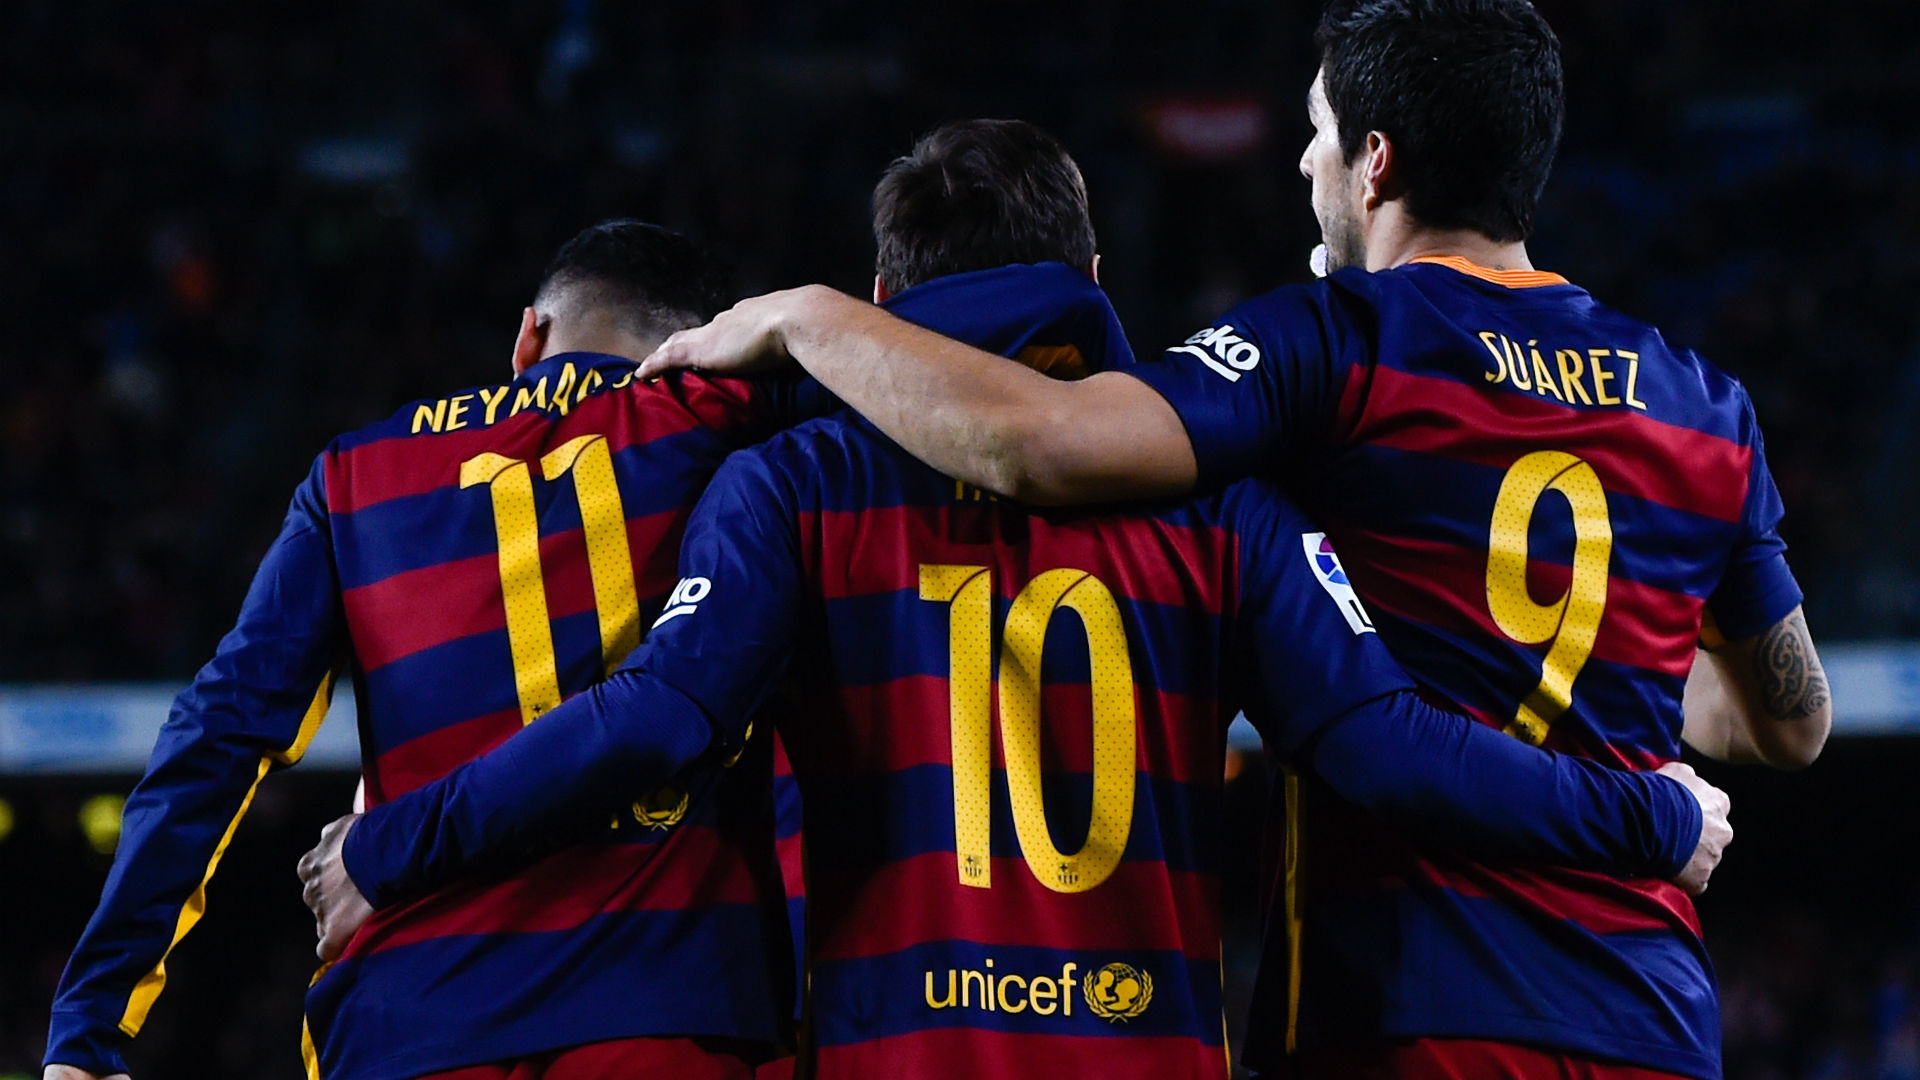 Arsene Wenger insists Arsenal are prepared to face Messi, Suarez and Neymar